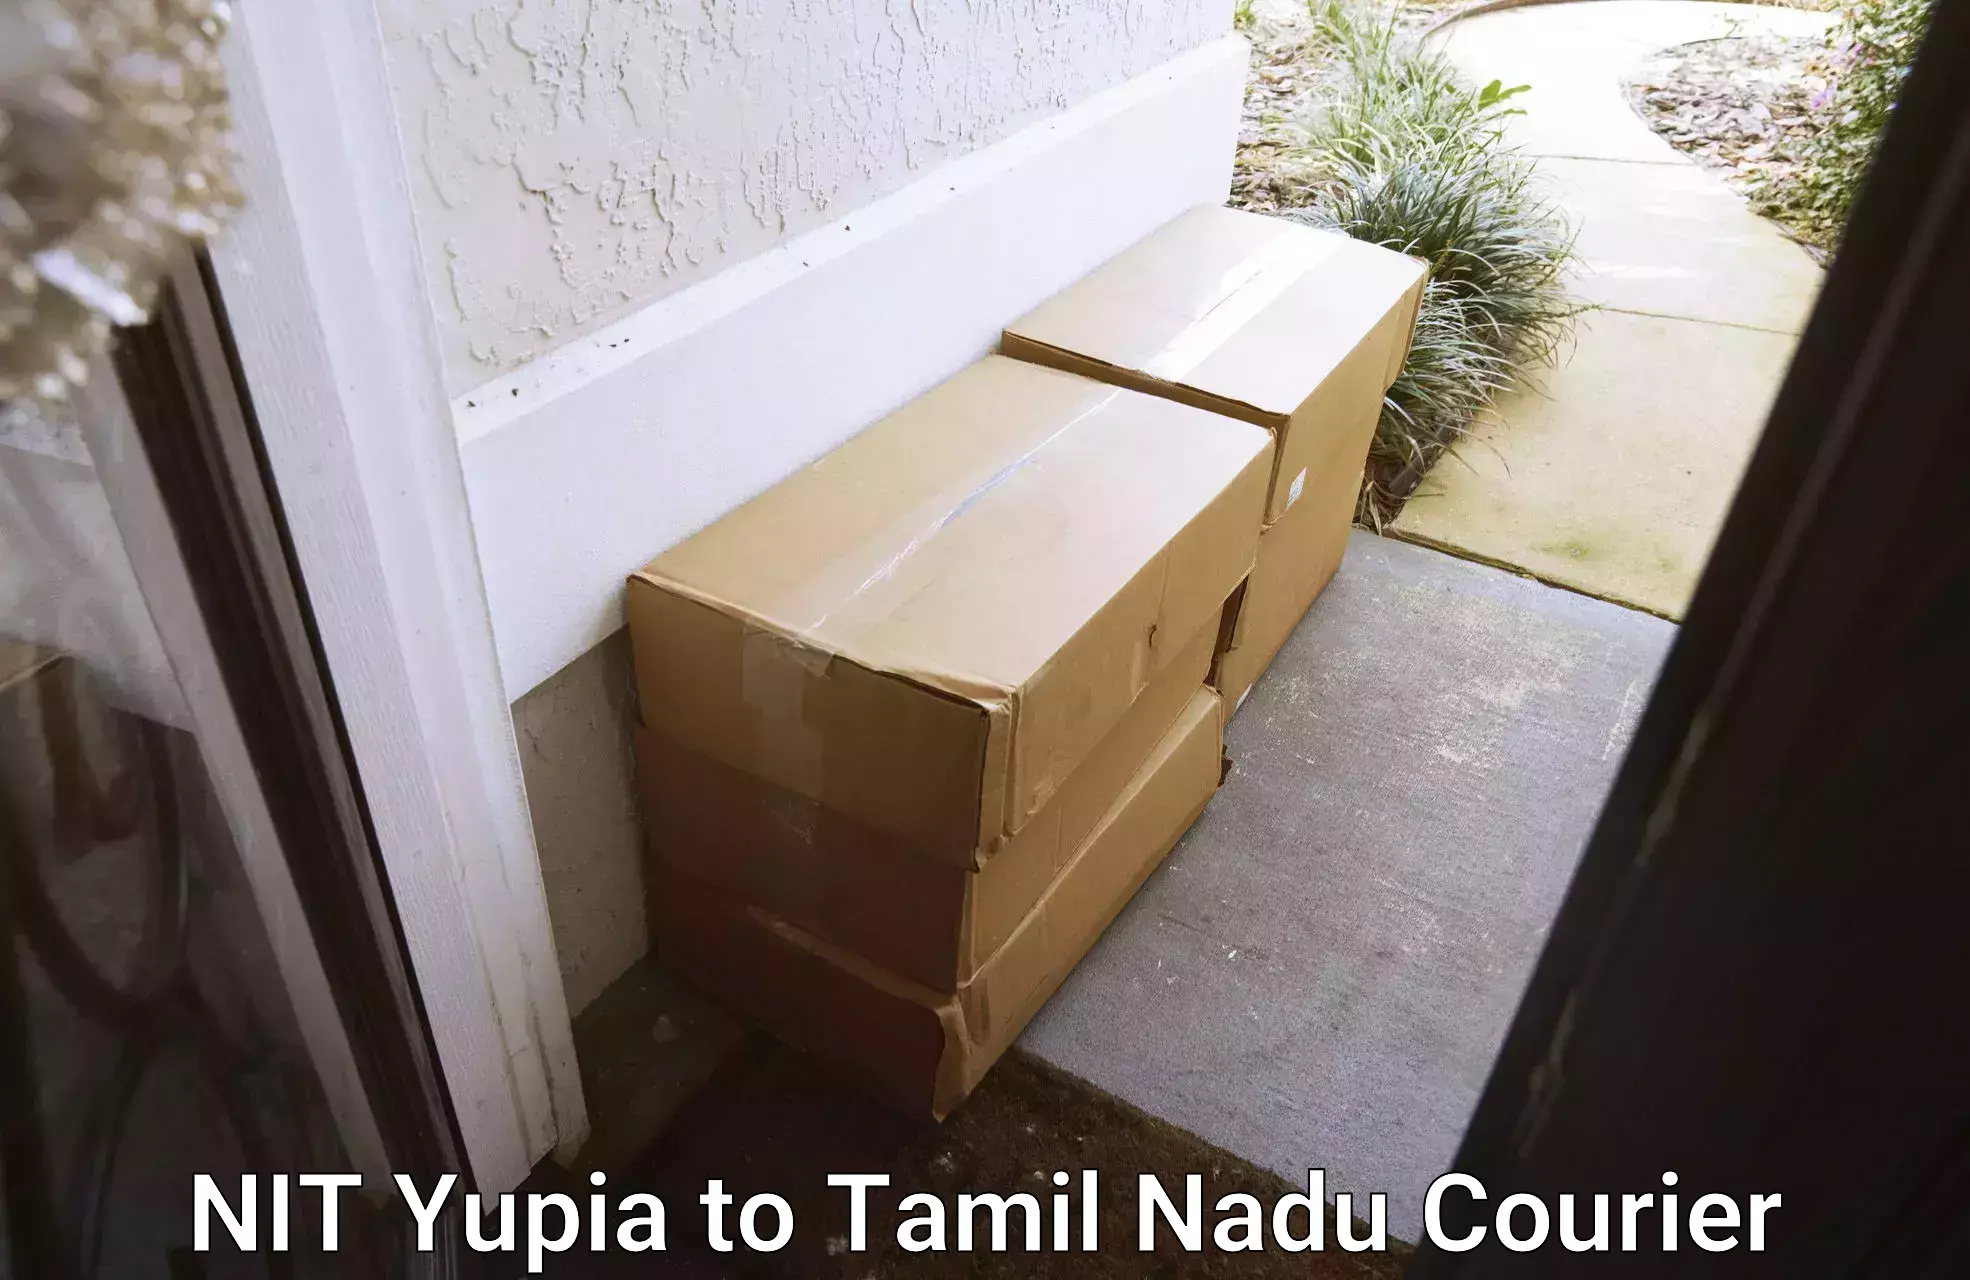 Pharmaceutical courier in NIT Yupia to Dindigul